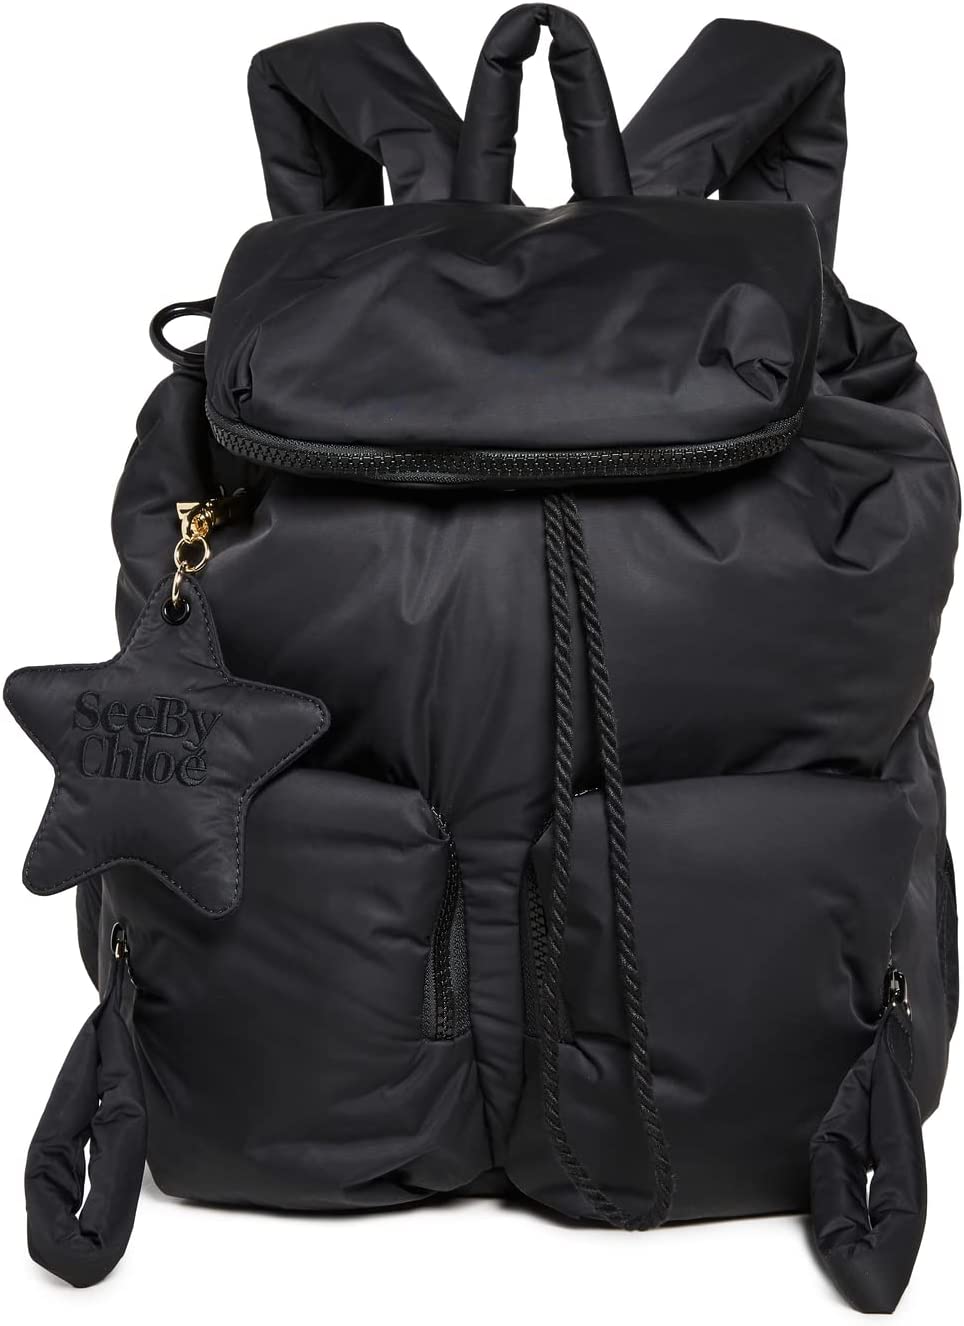 Shop See By Chloé See By Chloe Women's Joy Rider Backpack, Black, One Size